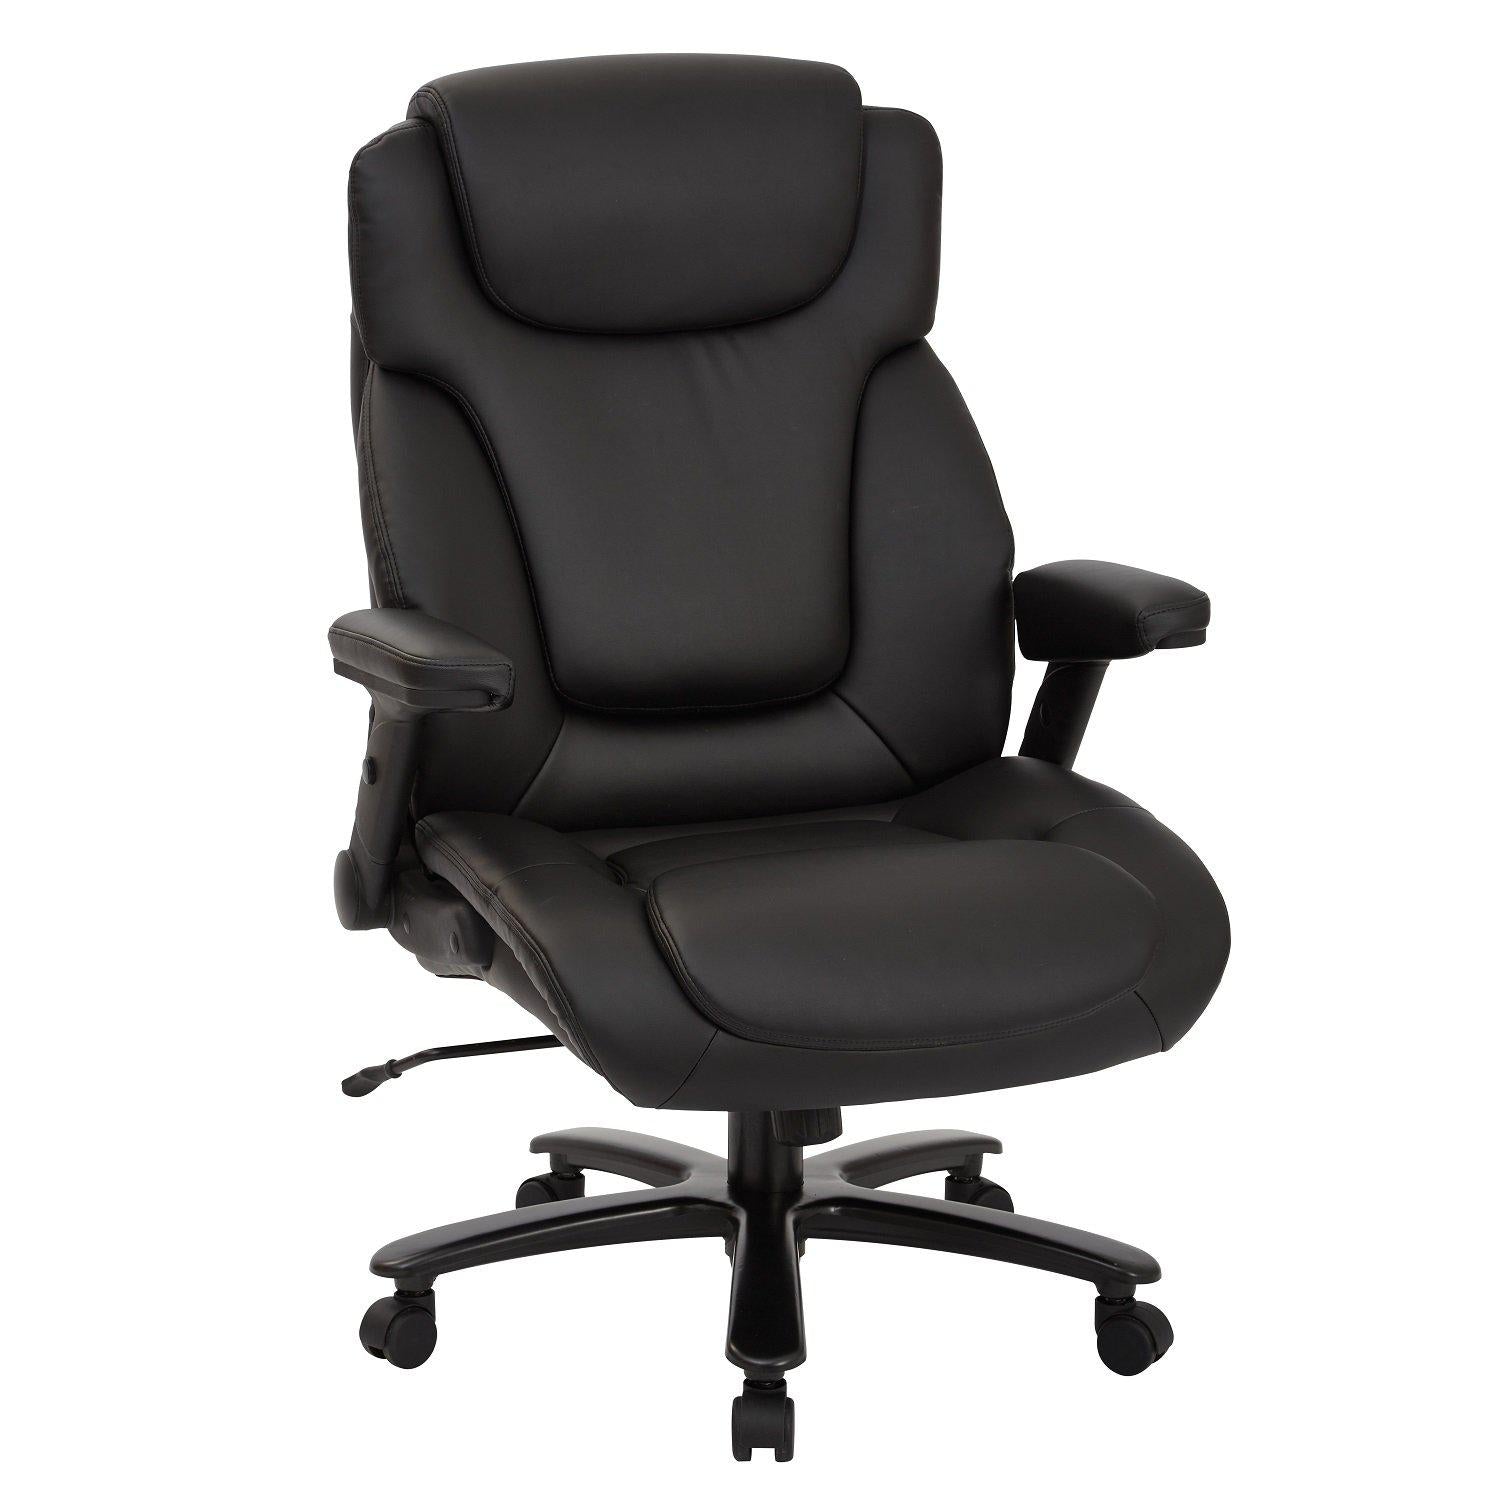 Big and Tall Deluxe High Back Bonded Leather Executive Chair with Padded Flip Arms